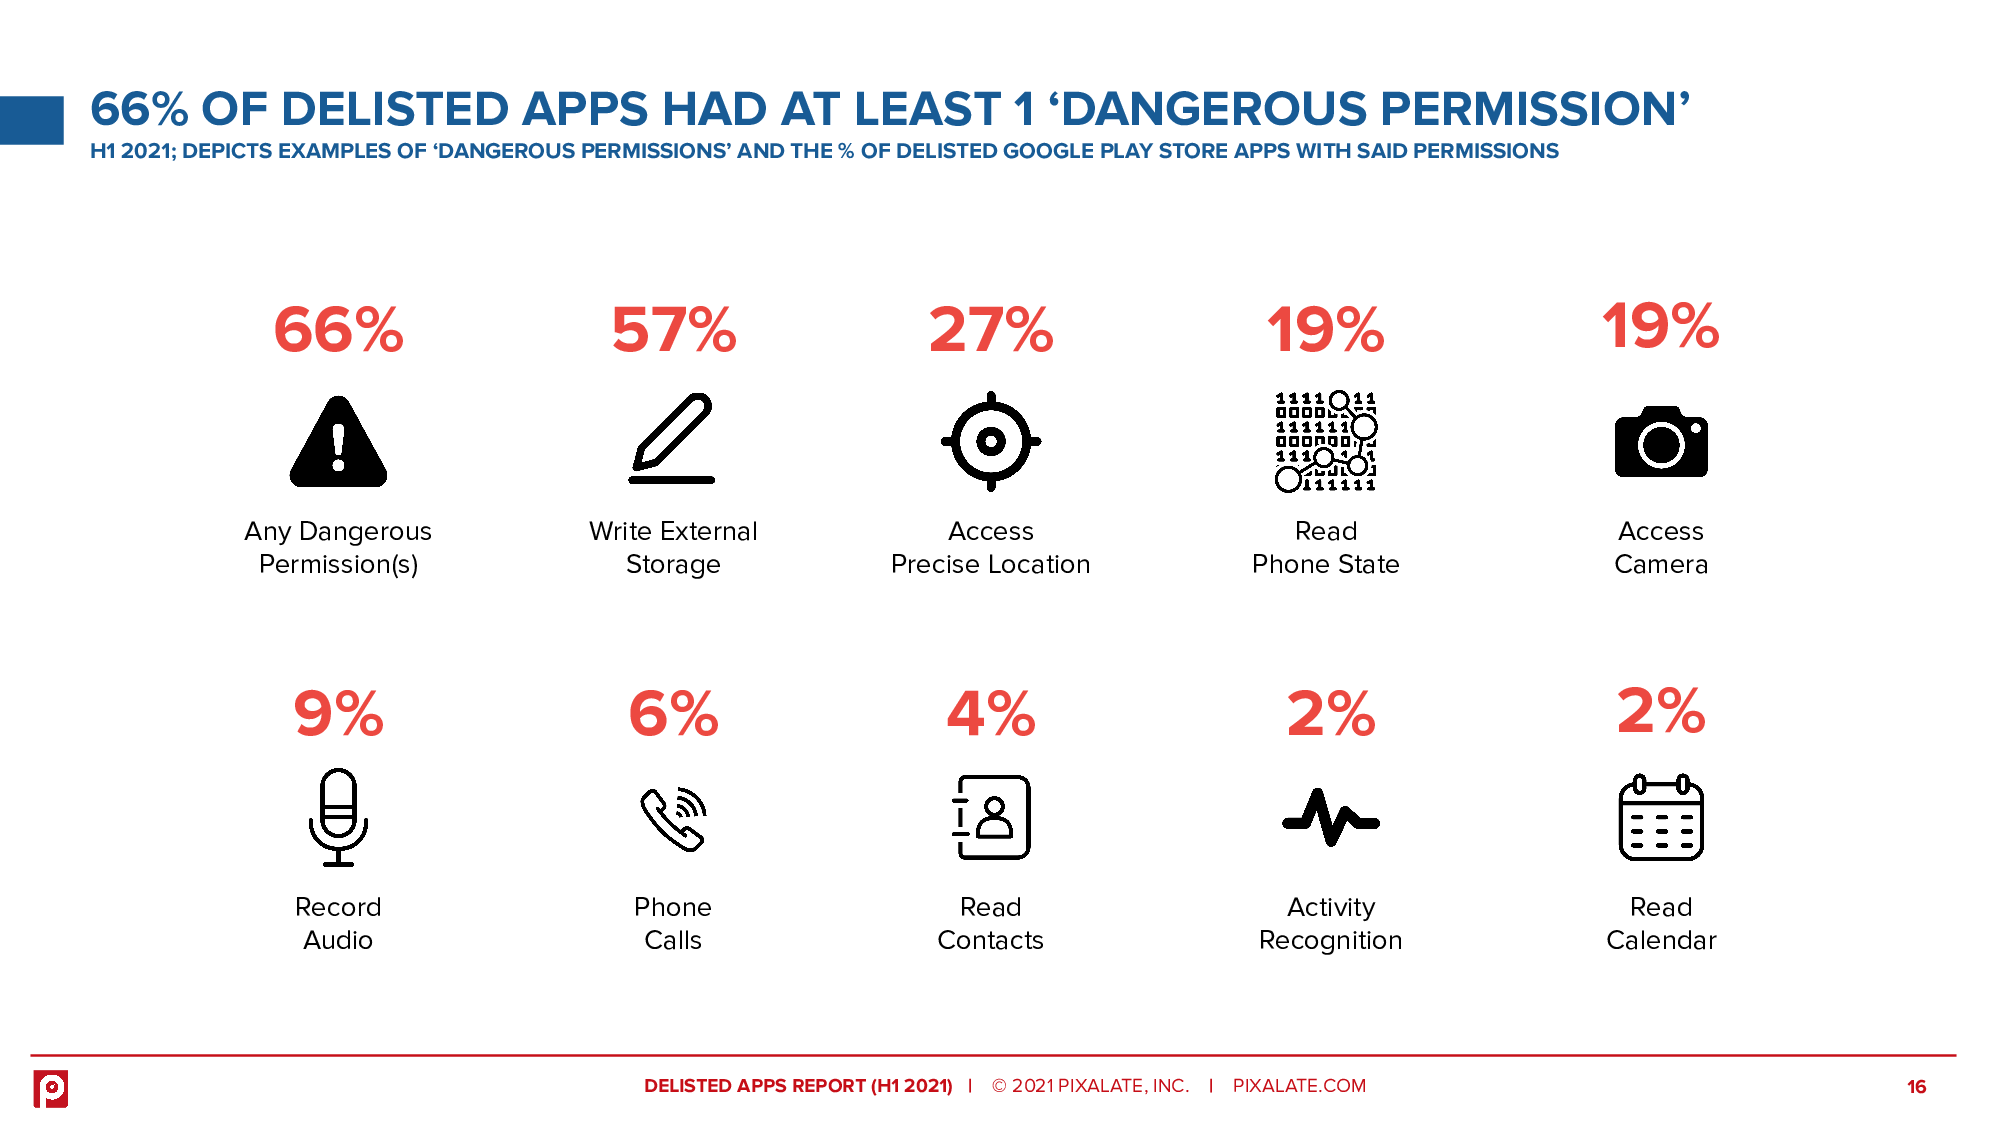 66% of Delisted Apps Had at Least 1 ‘dangerous Permission’